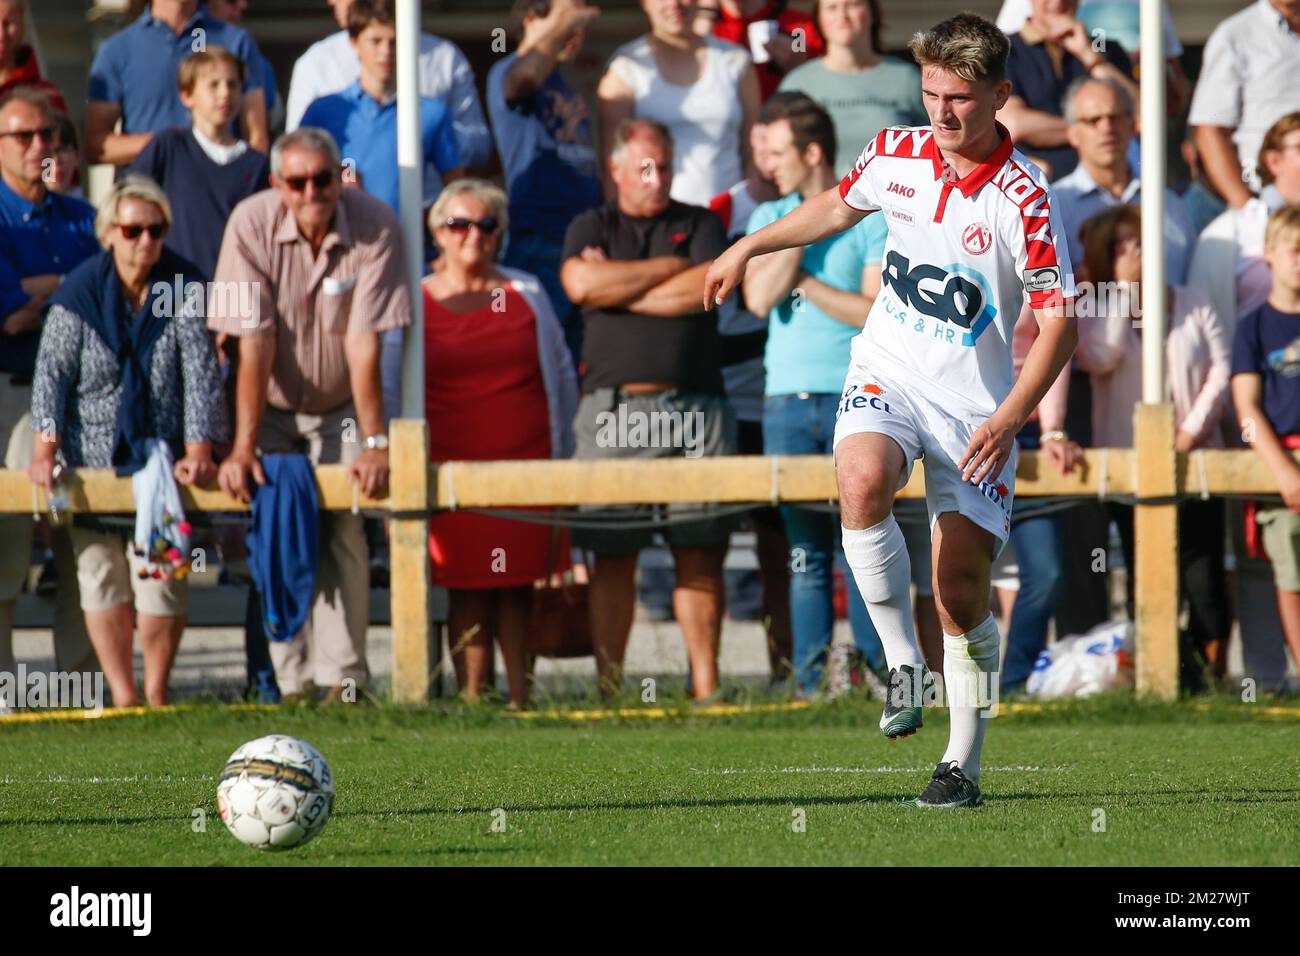 Kortrijk's Amarildo Gjoka pictured in action during a friendly soccer game between KV Kortrijk and Wikings Kortrijk, in Kortrijk, Friday 23 June 2017, the first friendly game of Jupiler Pro League team KVK. BELGA PHOTO BRUNO FAHY Stock Photo